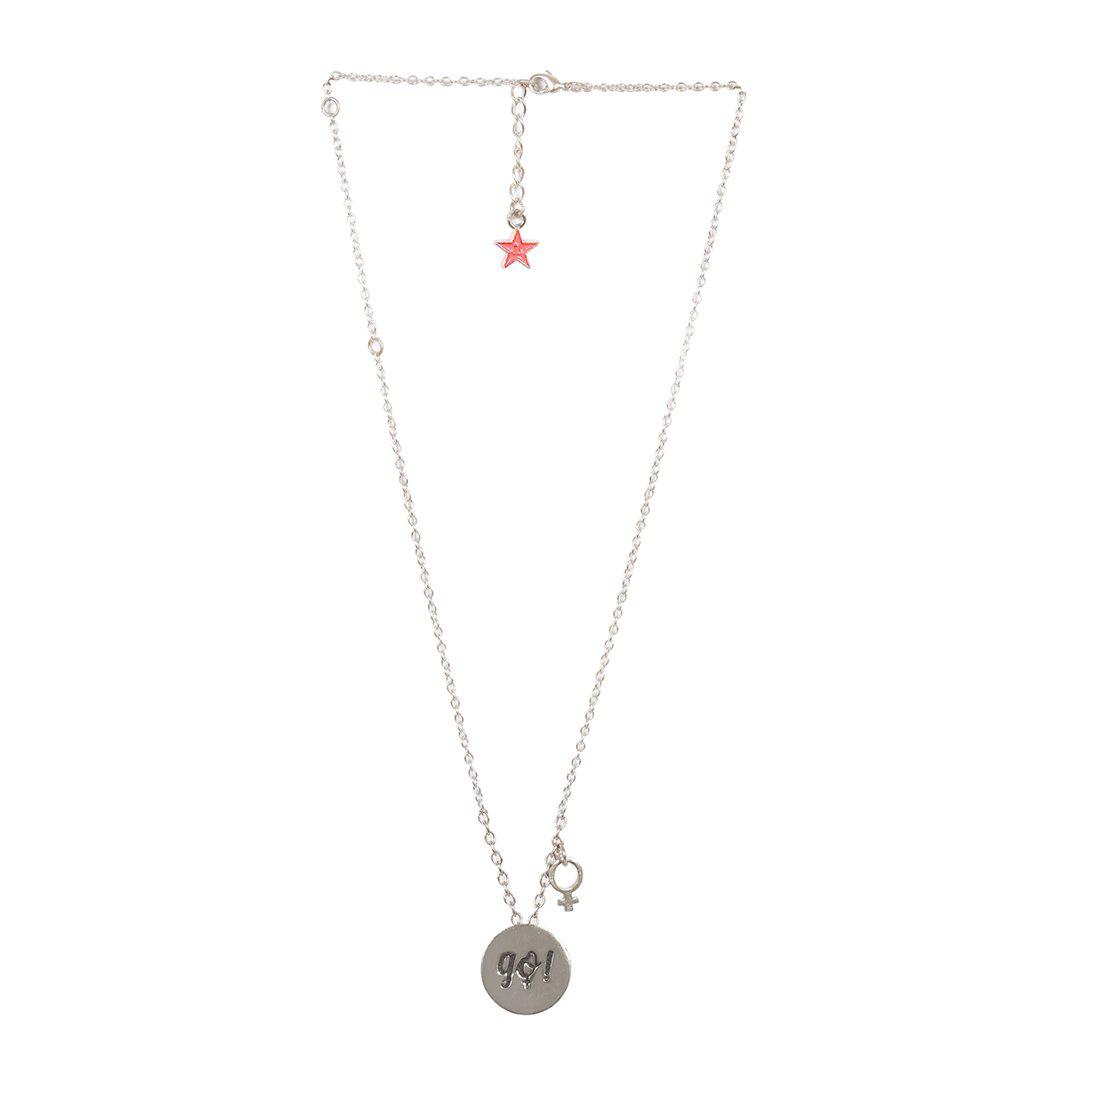 GO! CHAIN NECKLACE WITH GIRL CHARM